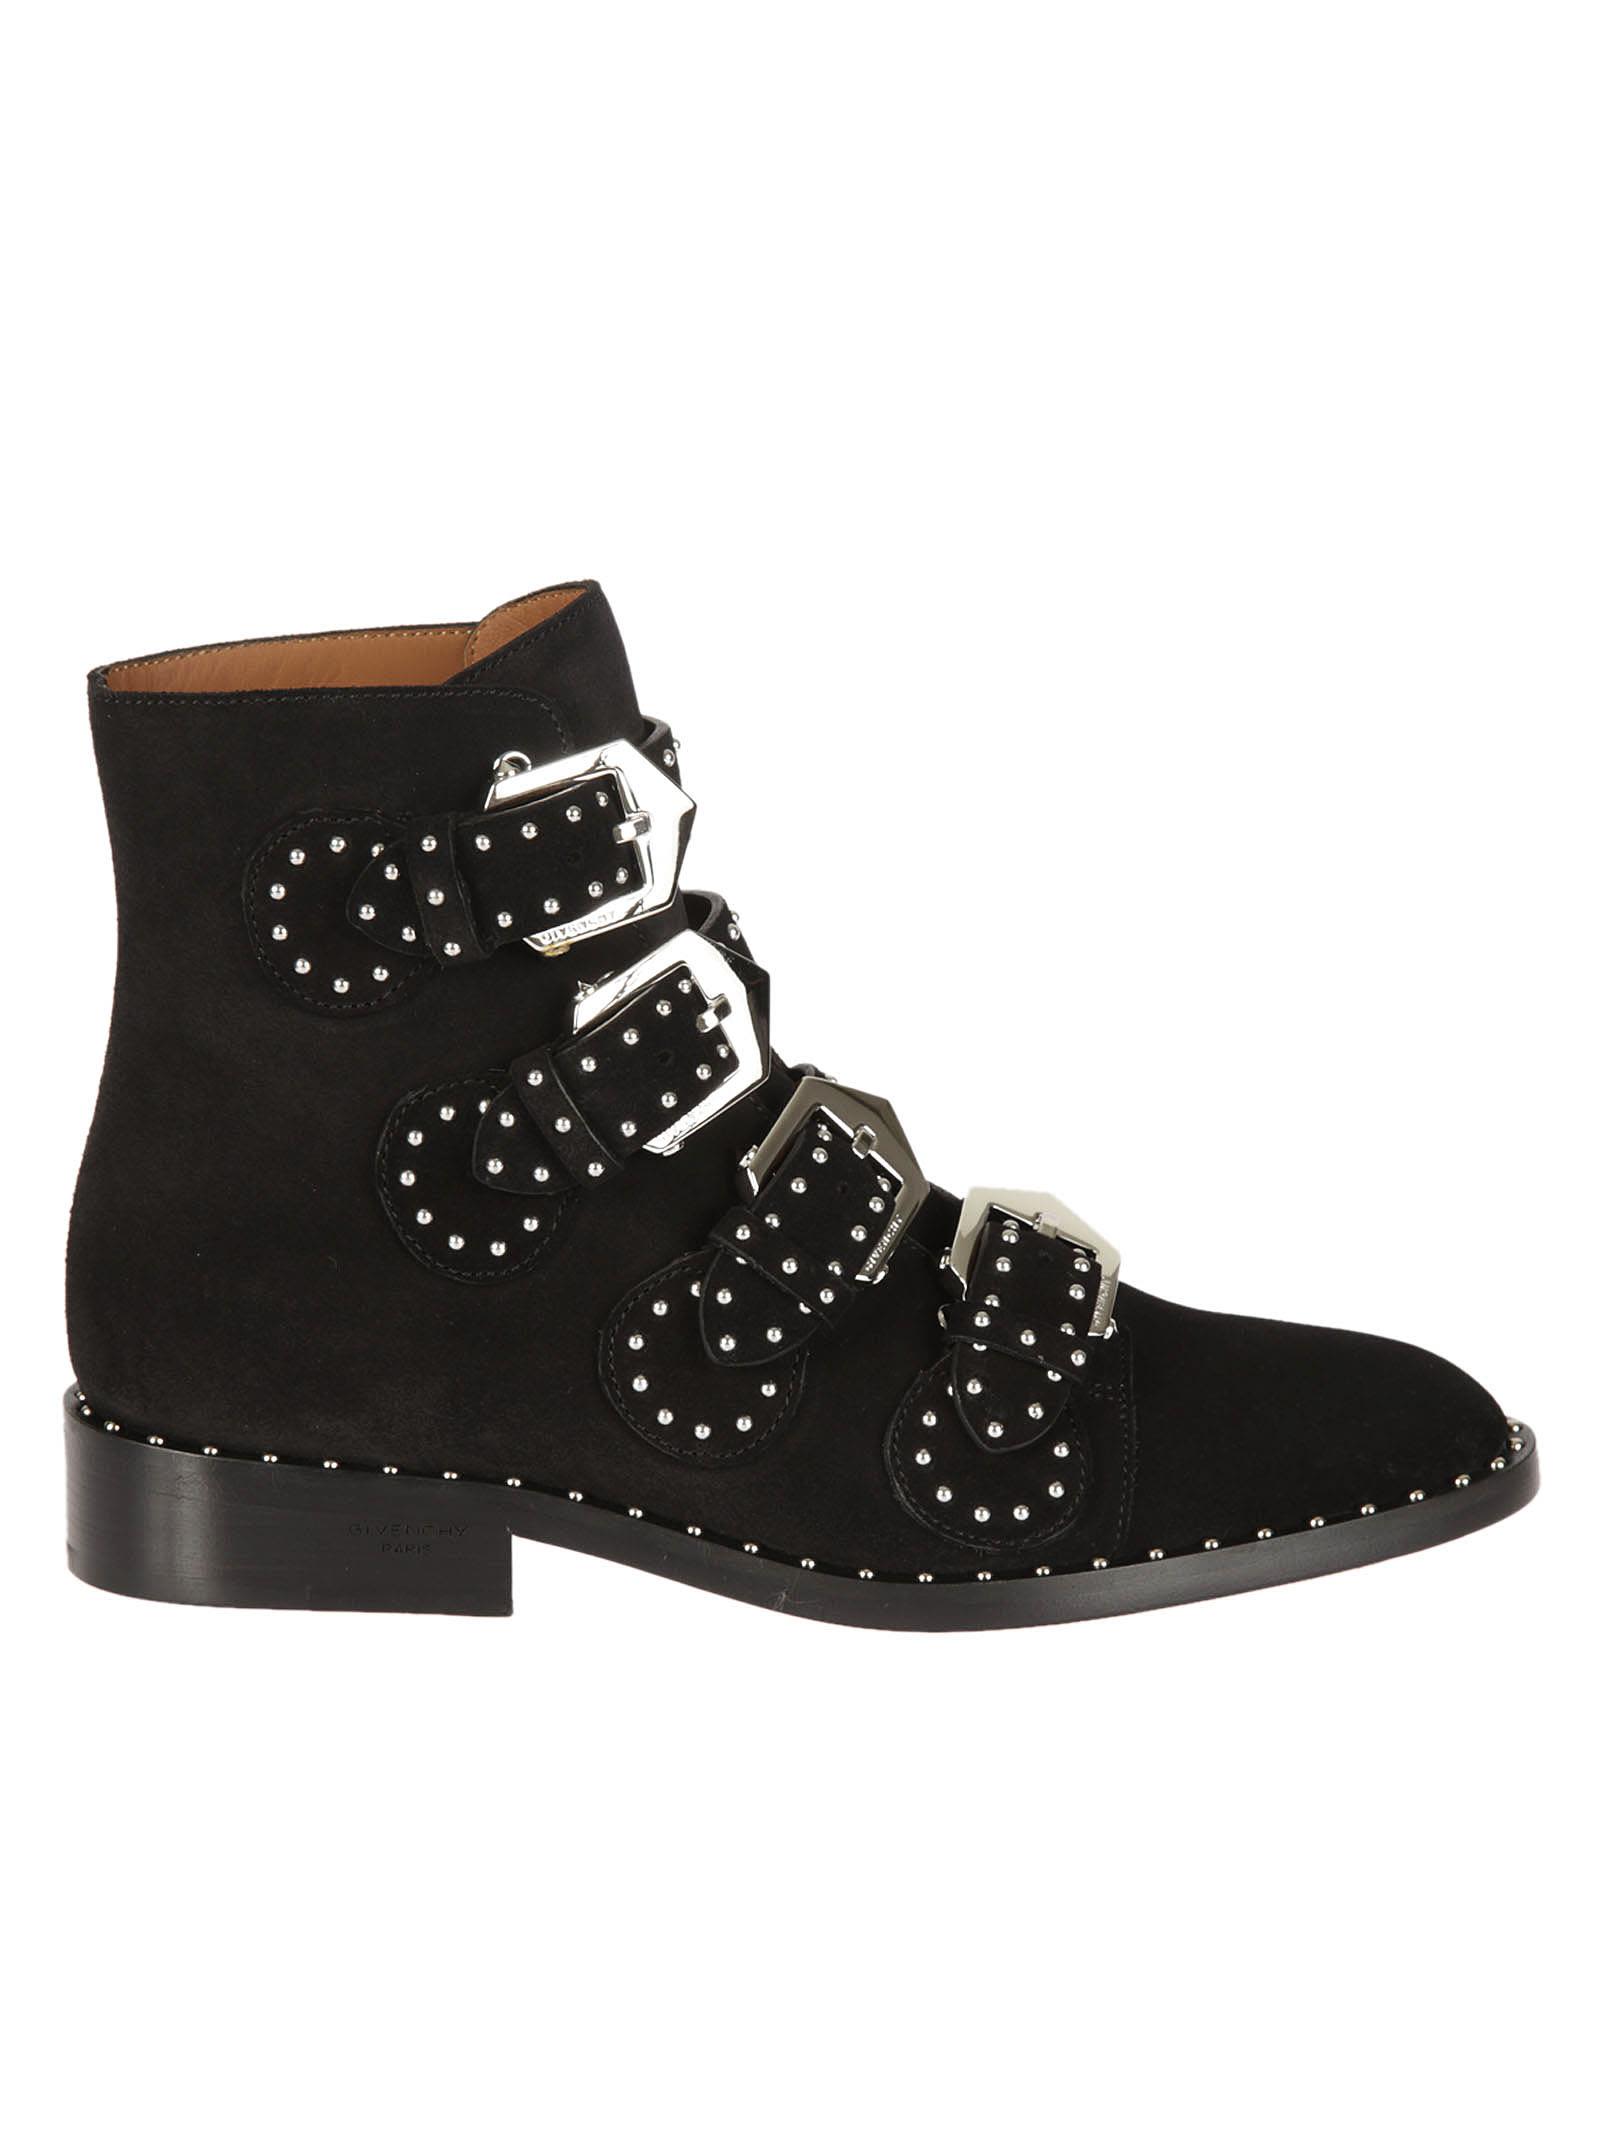 Givenchy - Givenchy Studded Buckled Boots - Black, Women's Boots | Italist